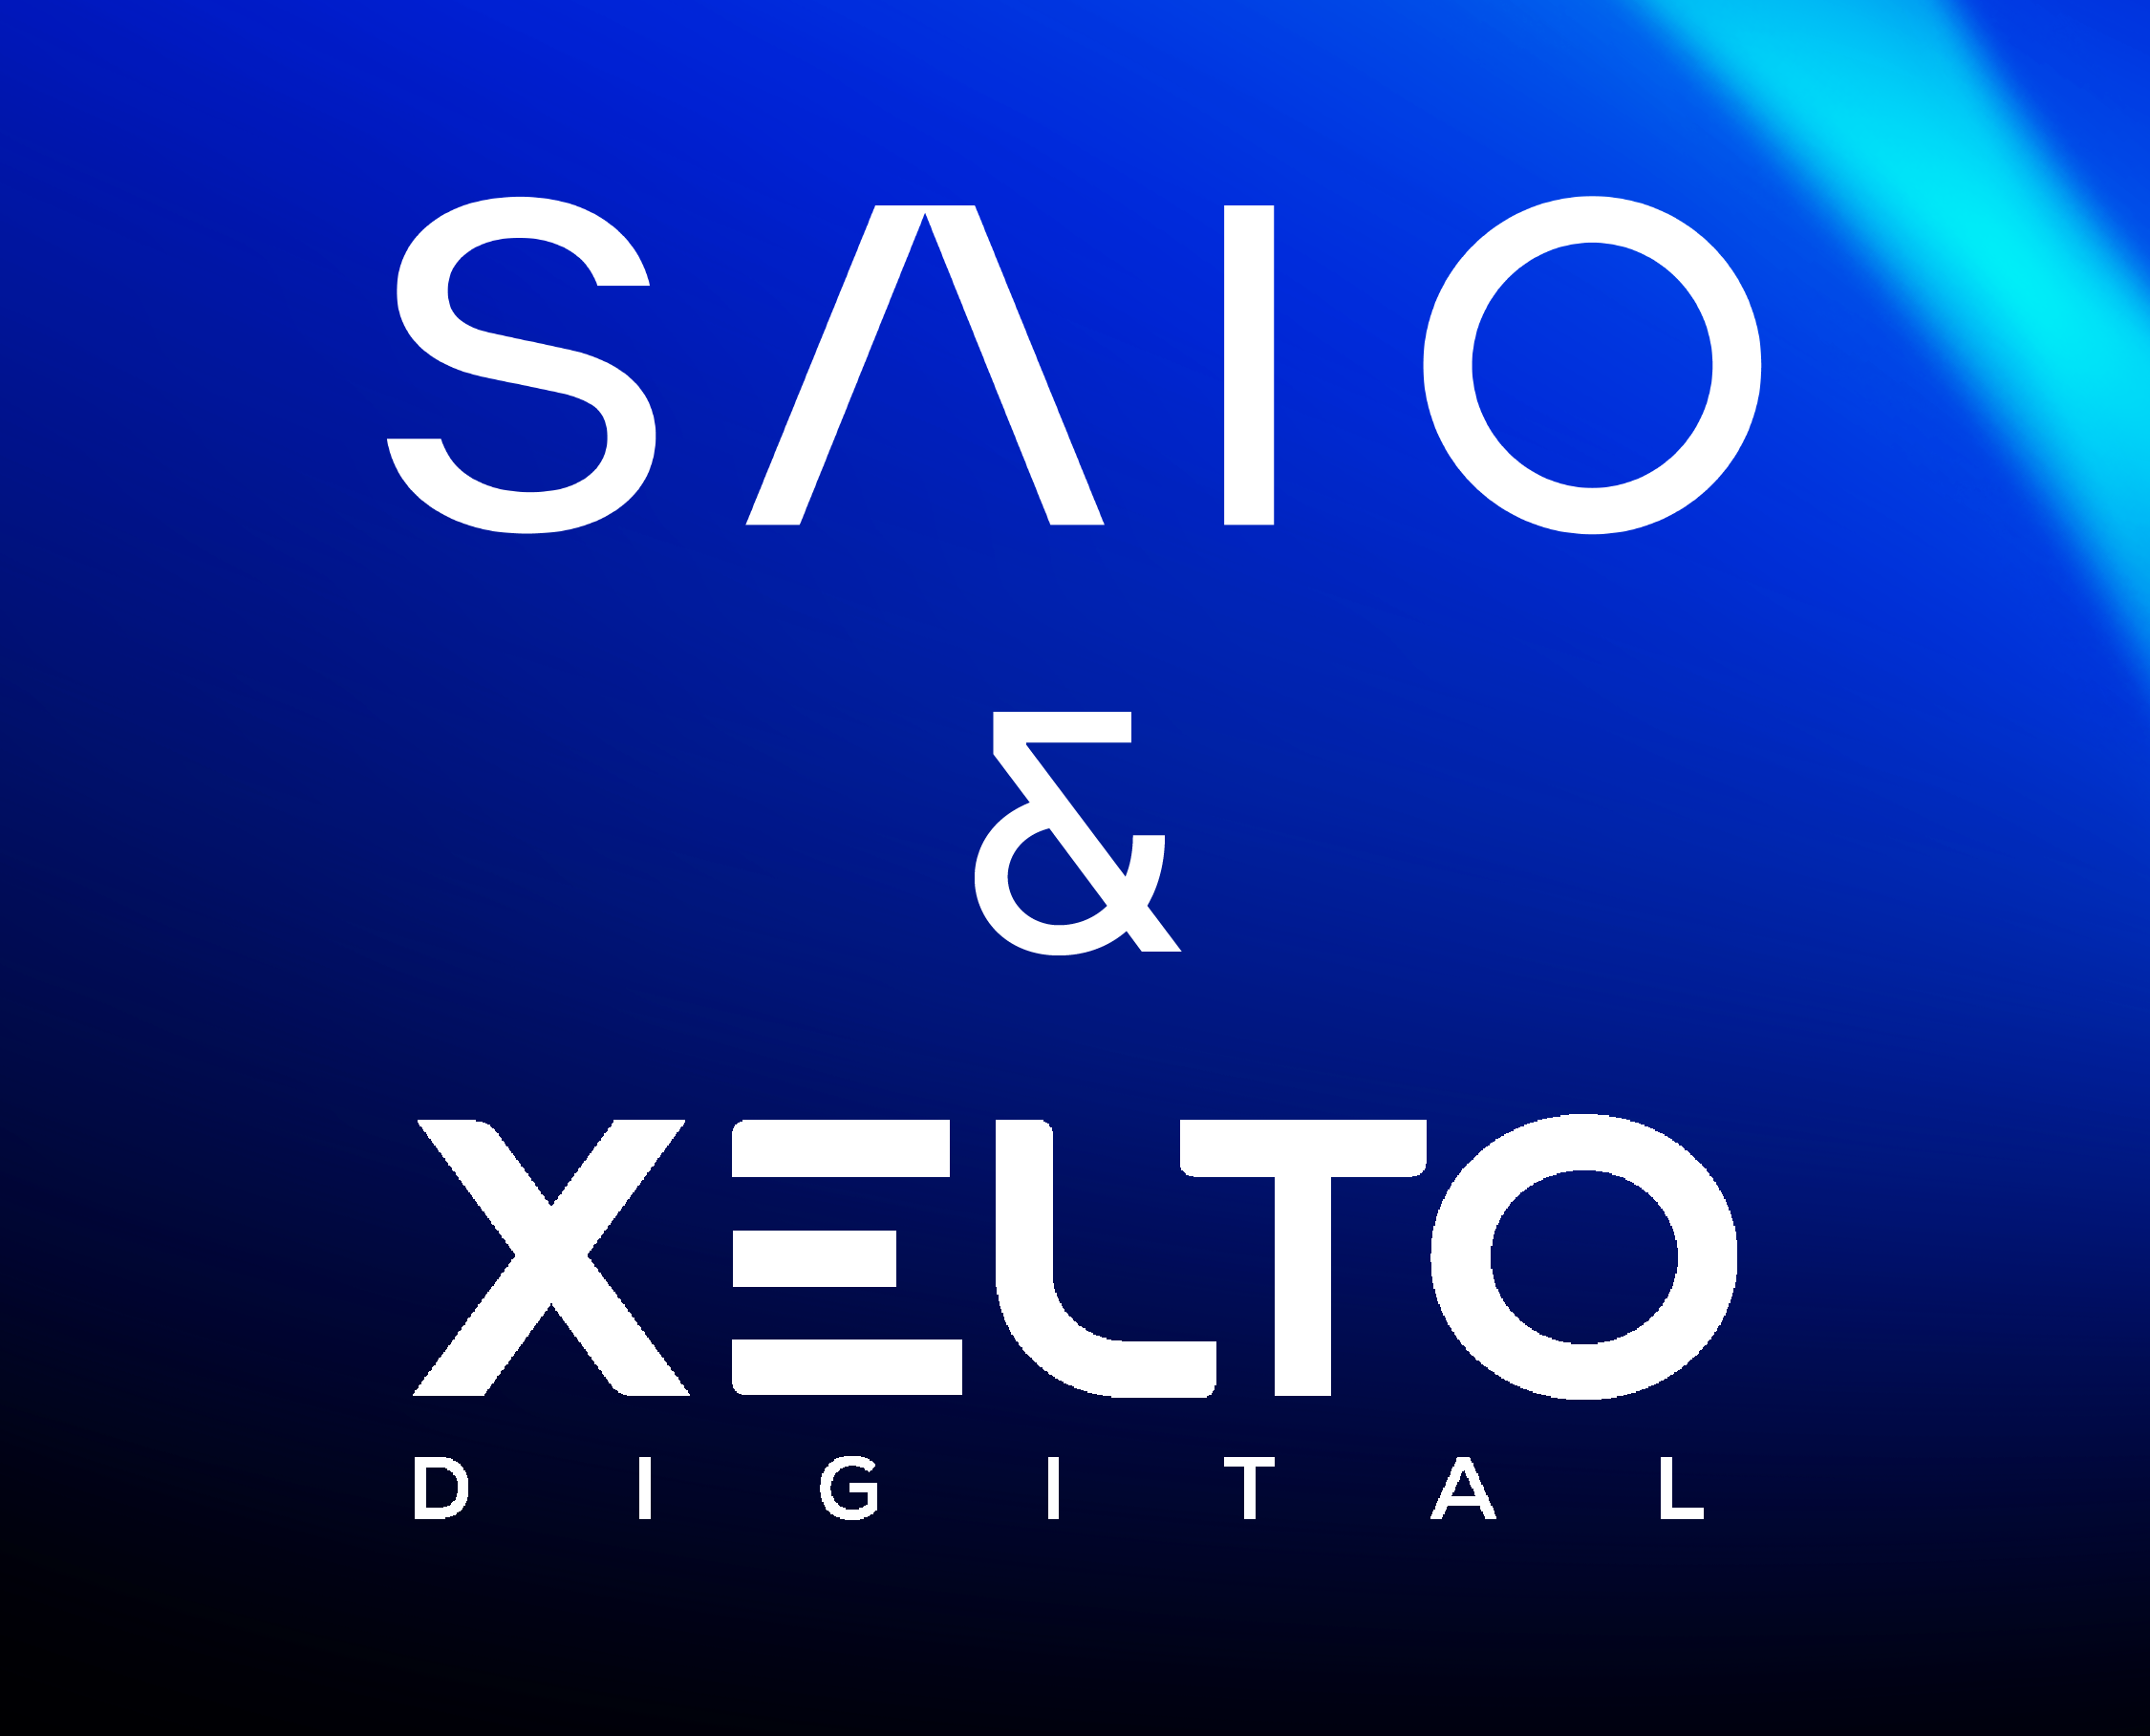 Introducing our new partner – SAIO